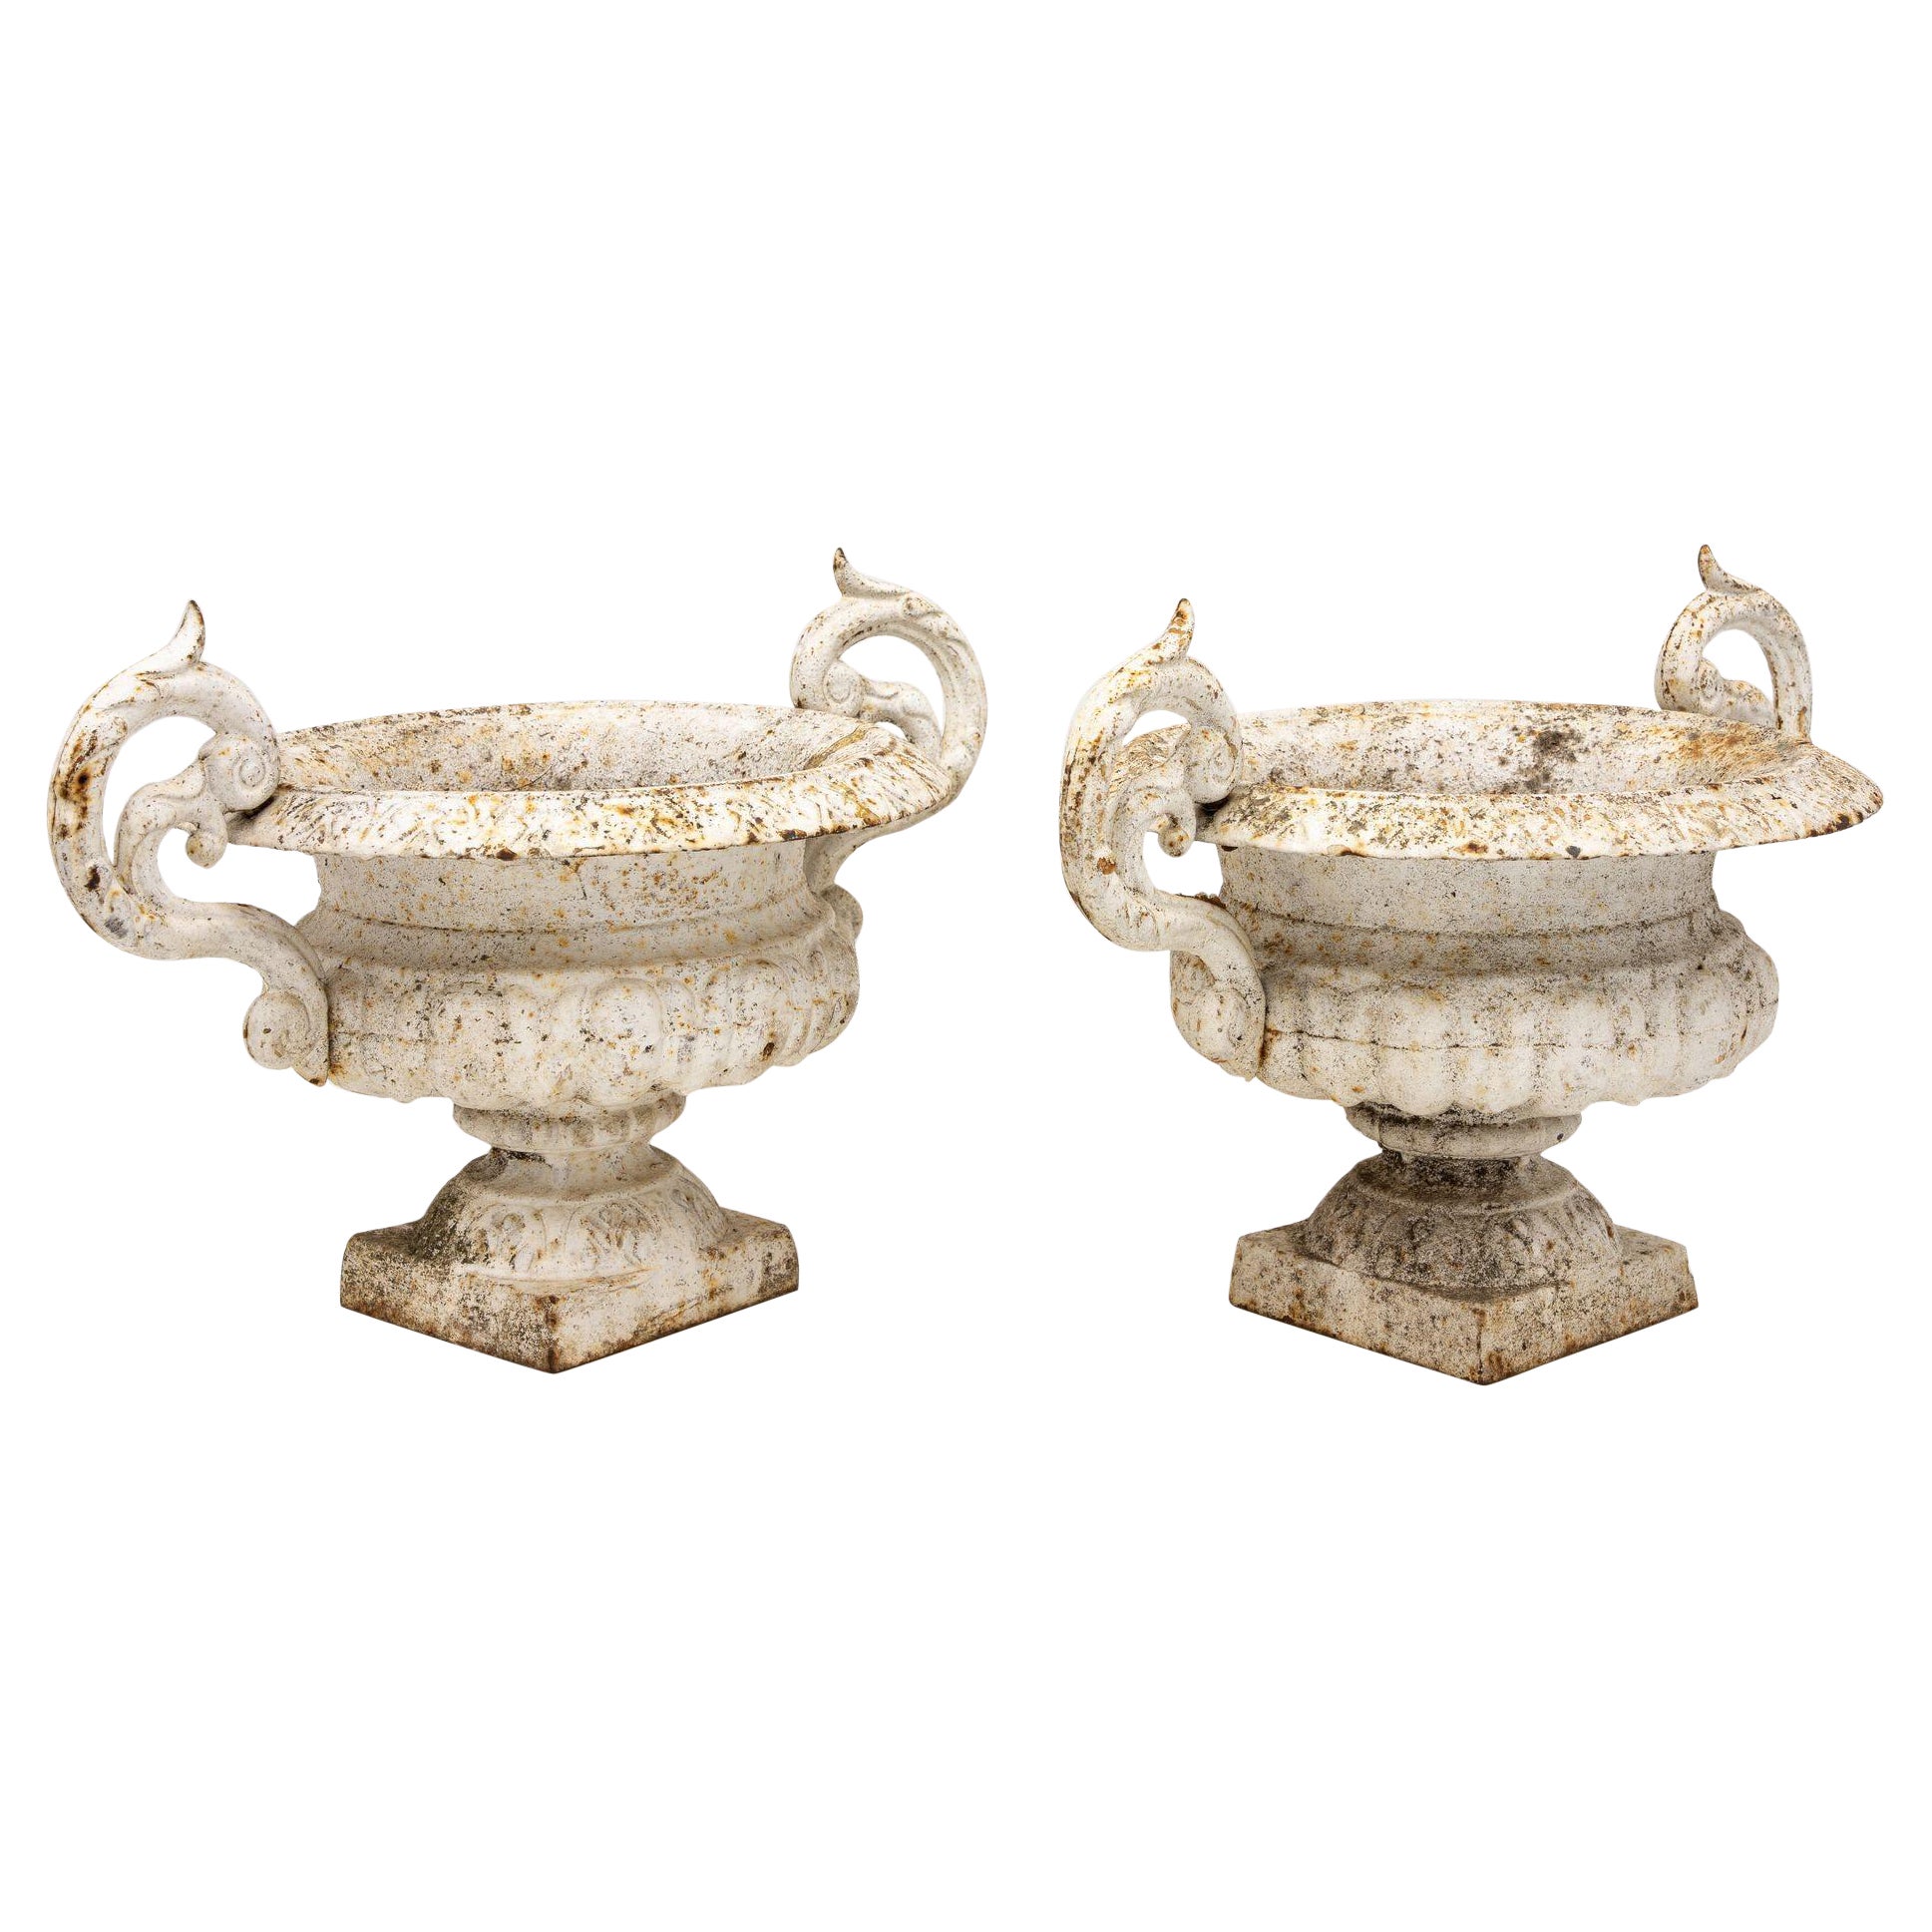 Pair of White Cast Iron Urns, French late 19th Century